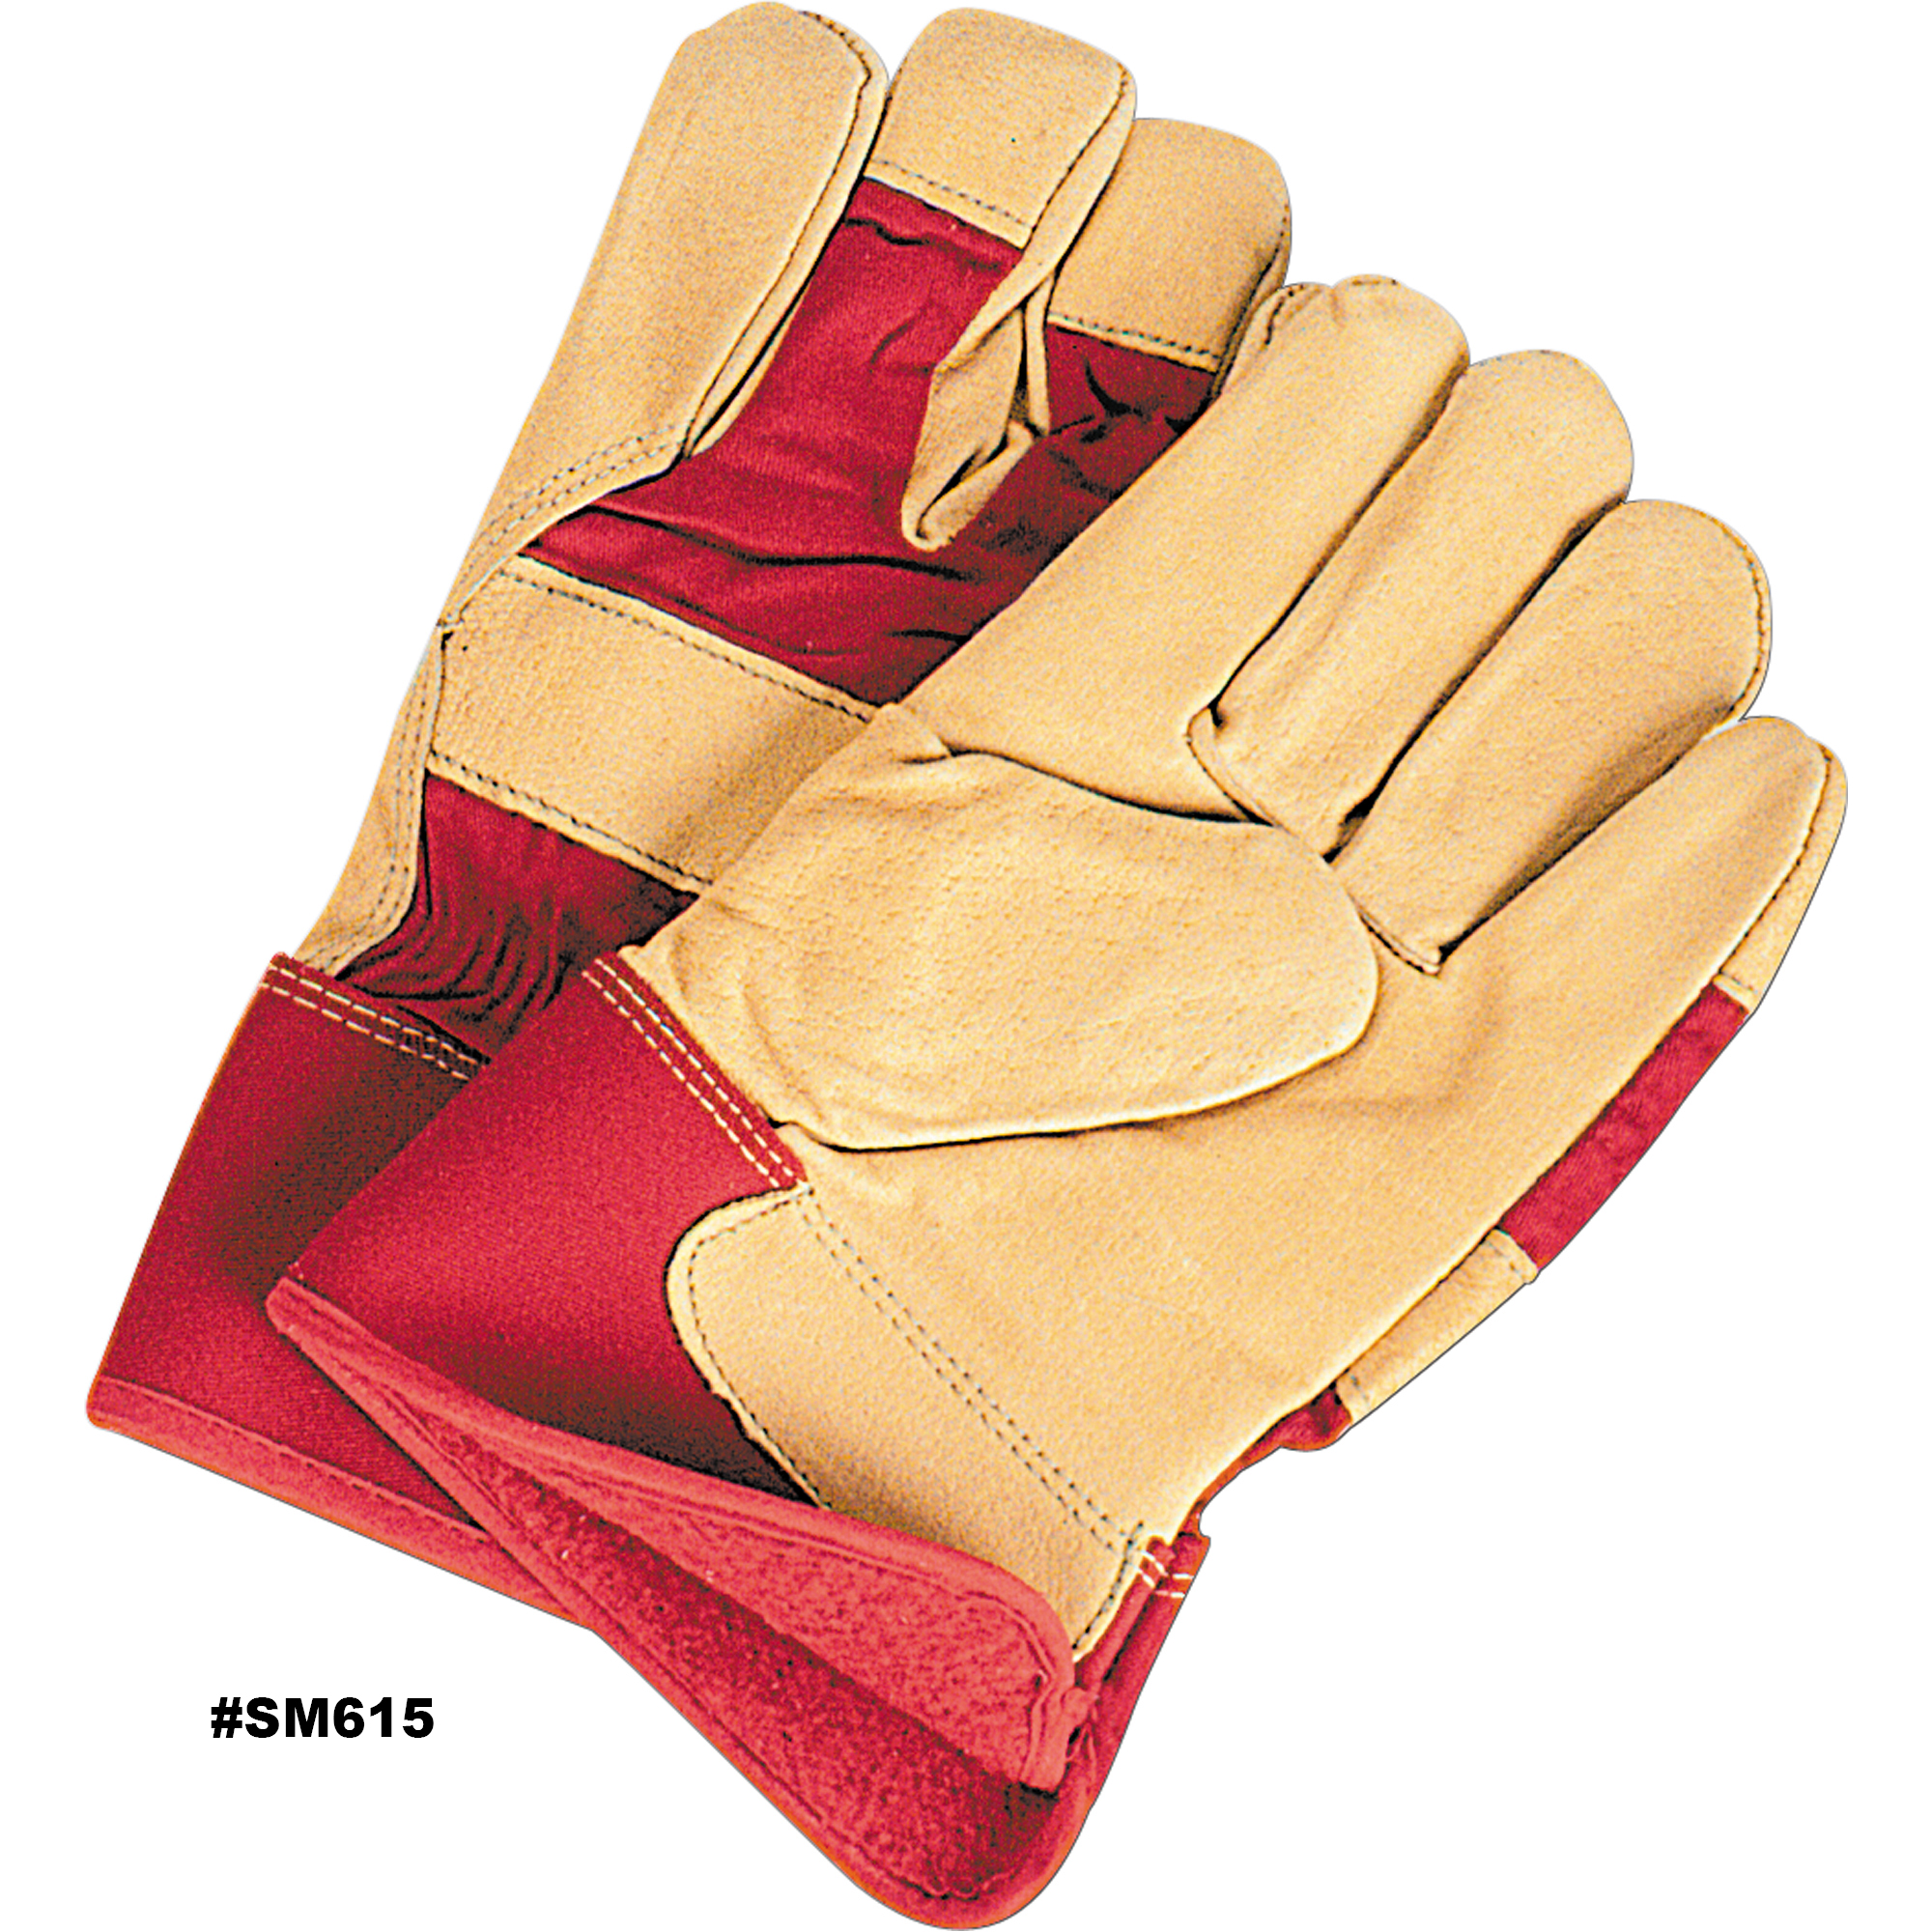 Zenith Fitters Gloves, Large, Grain Pigskin Palm, Thinsulate™ Inner Lining Model: SM615